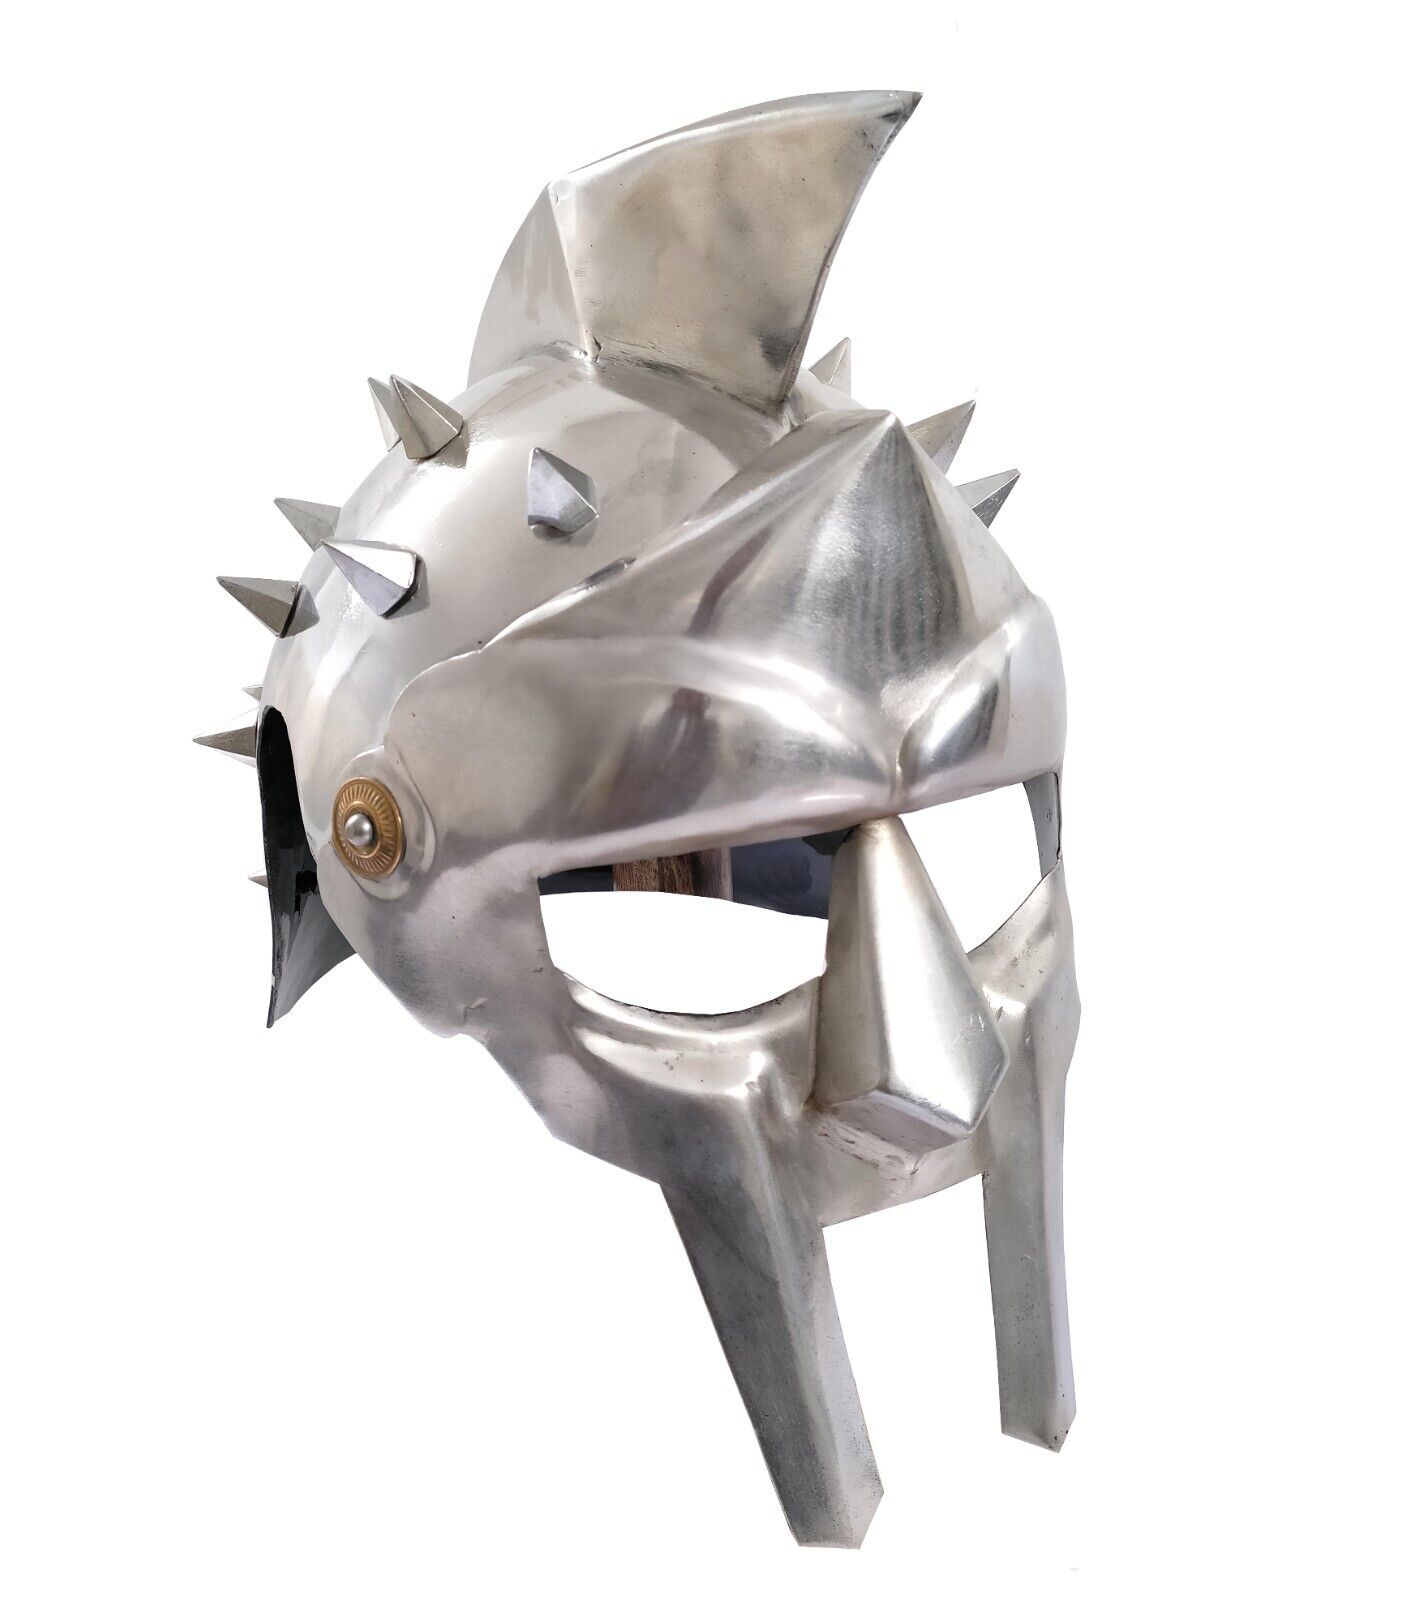 Medieval gladiator Crusader Metal Knight Helmets Wearable for Adult Costumes